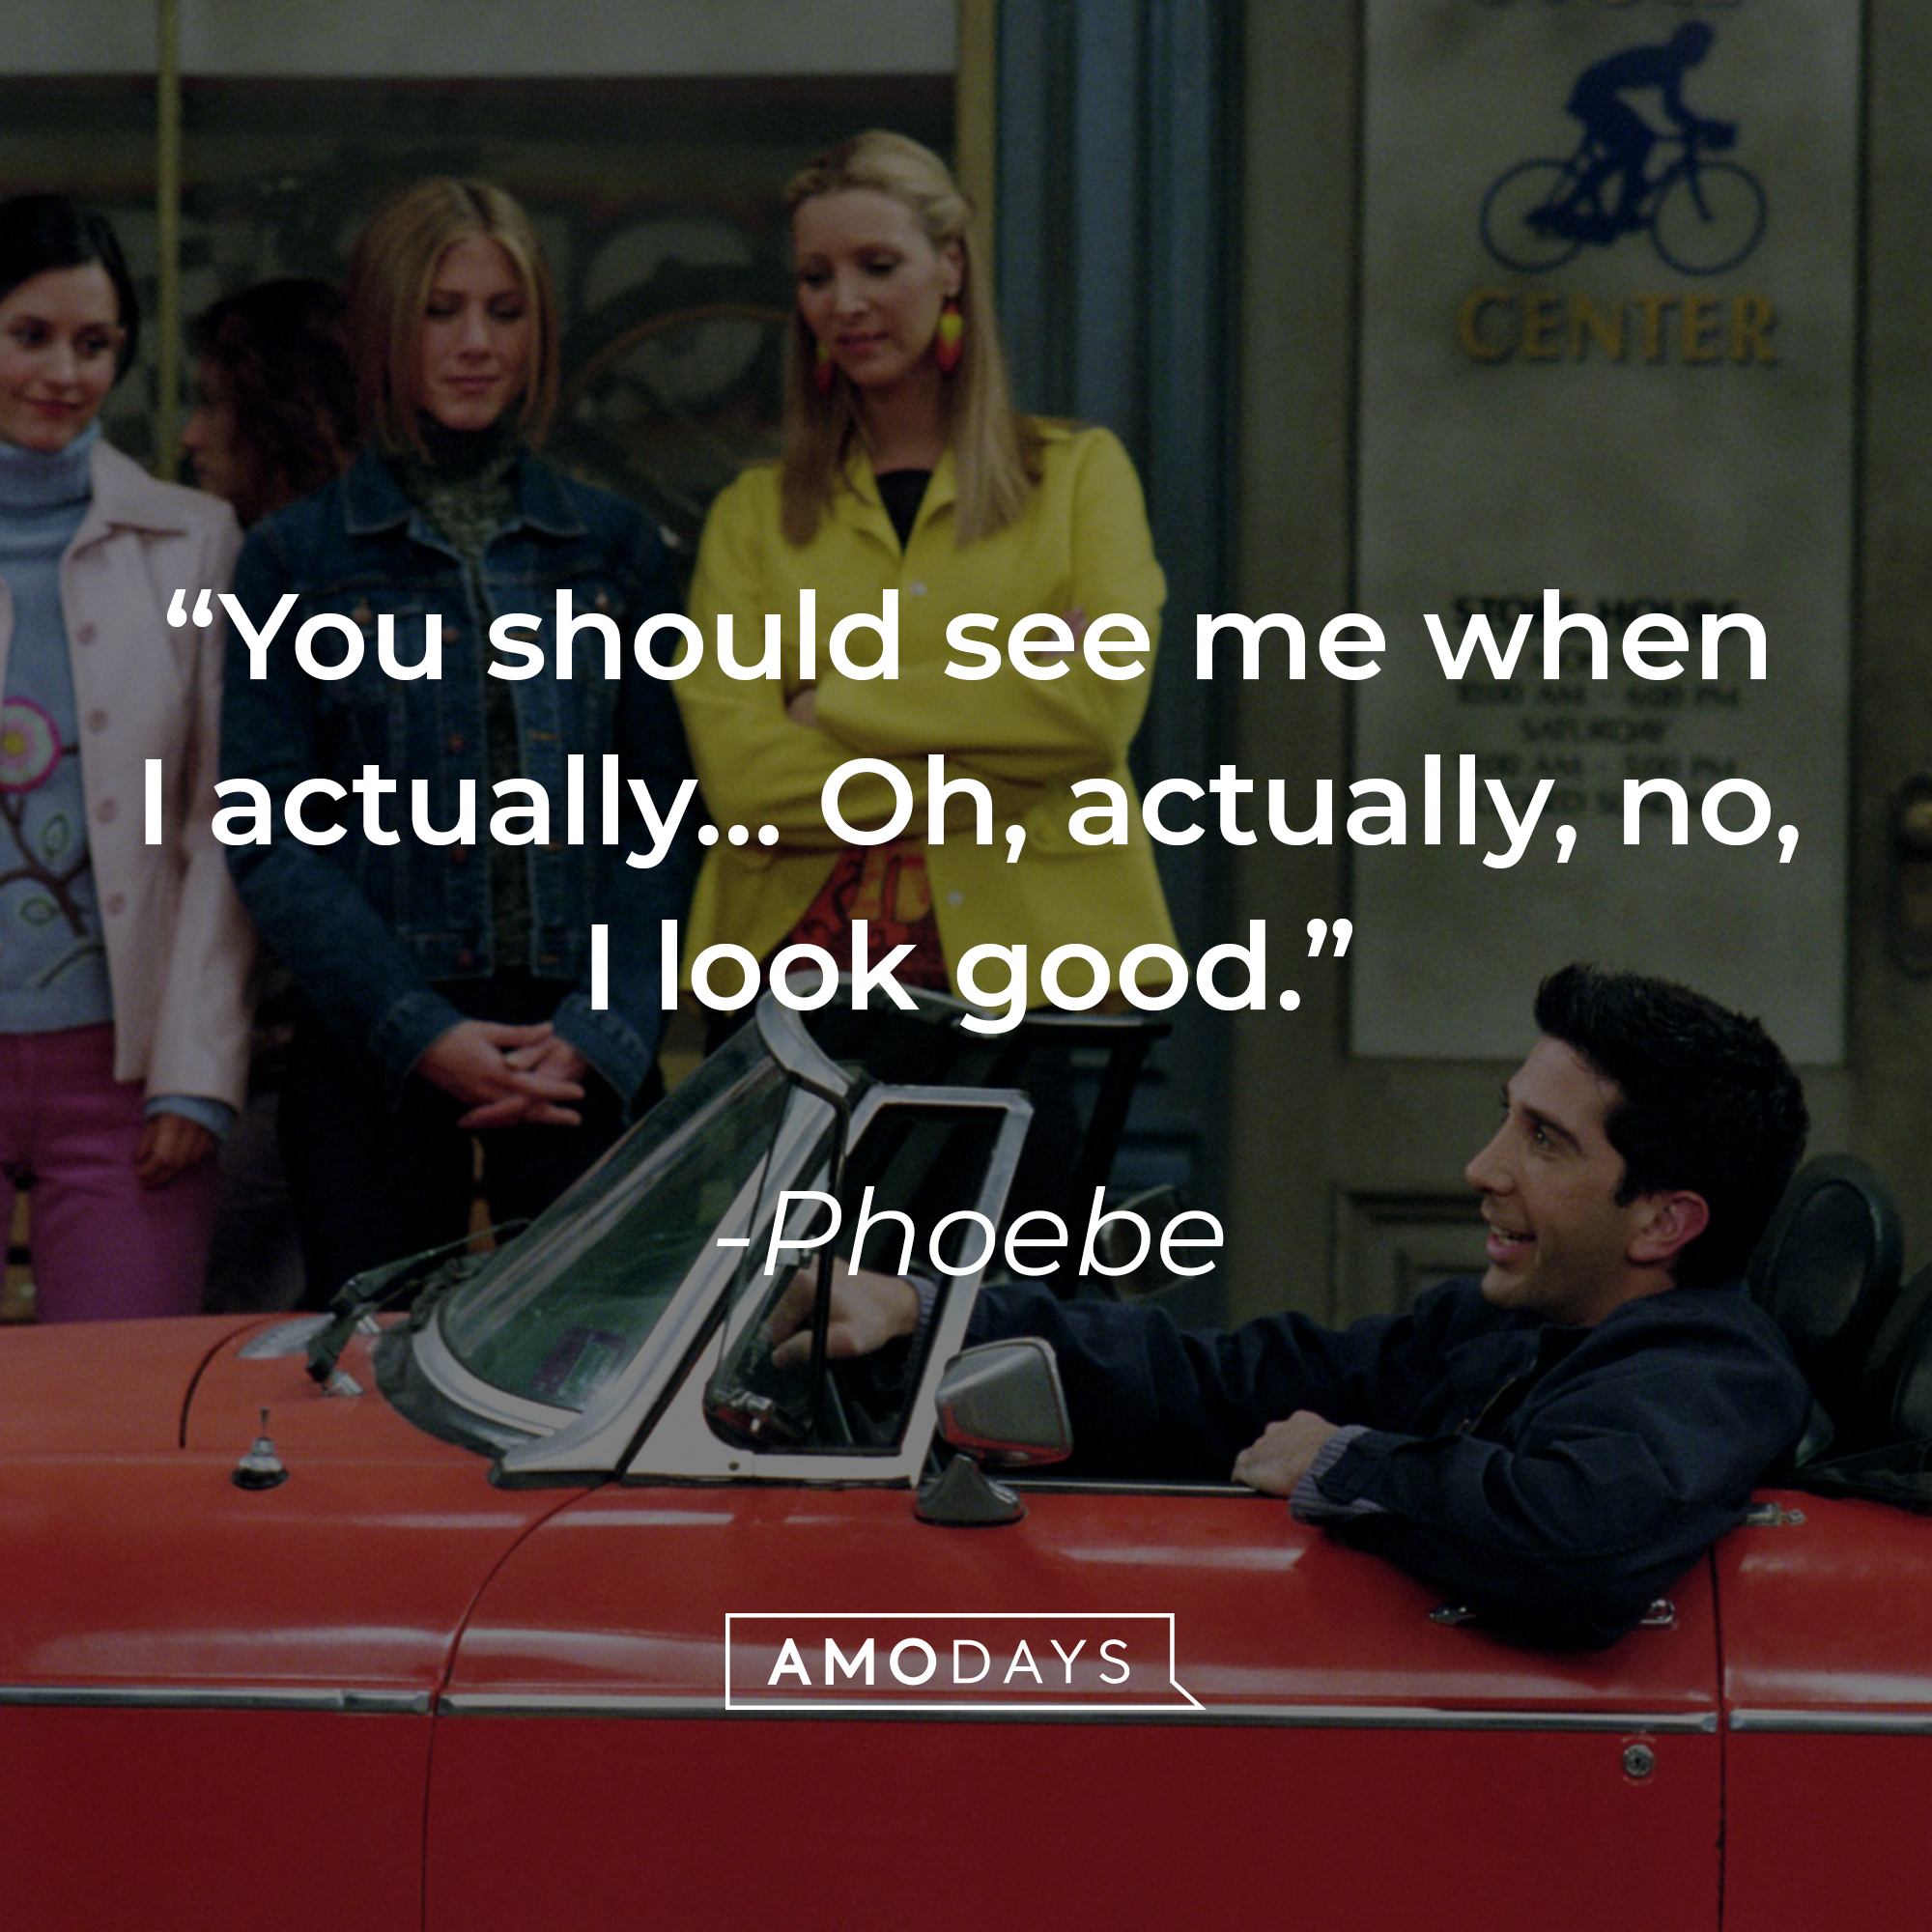 Phoebe's quote: "You should see me when I actually… Oh, actually, no, I look good." | Source: Facebook.com/friends.tv